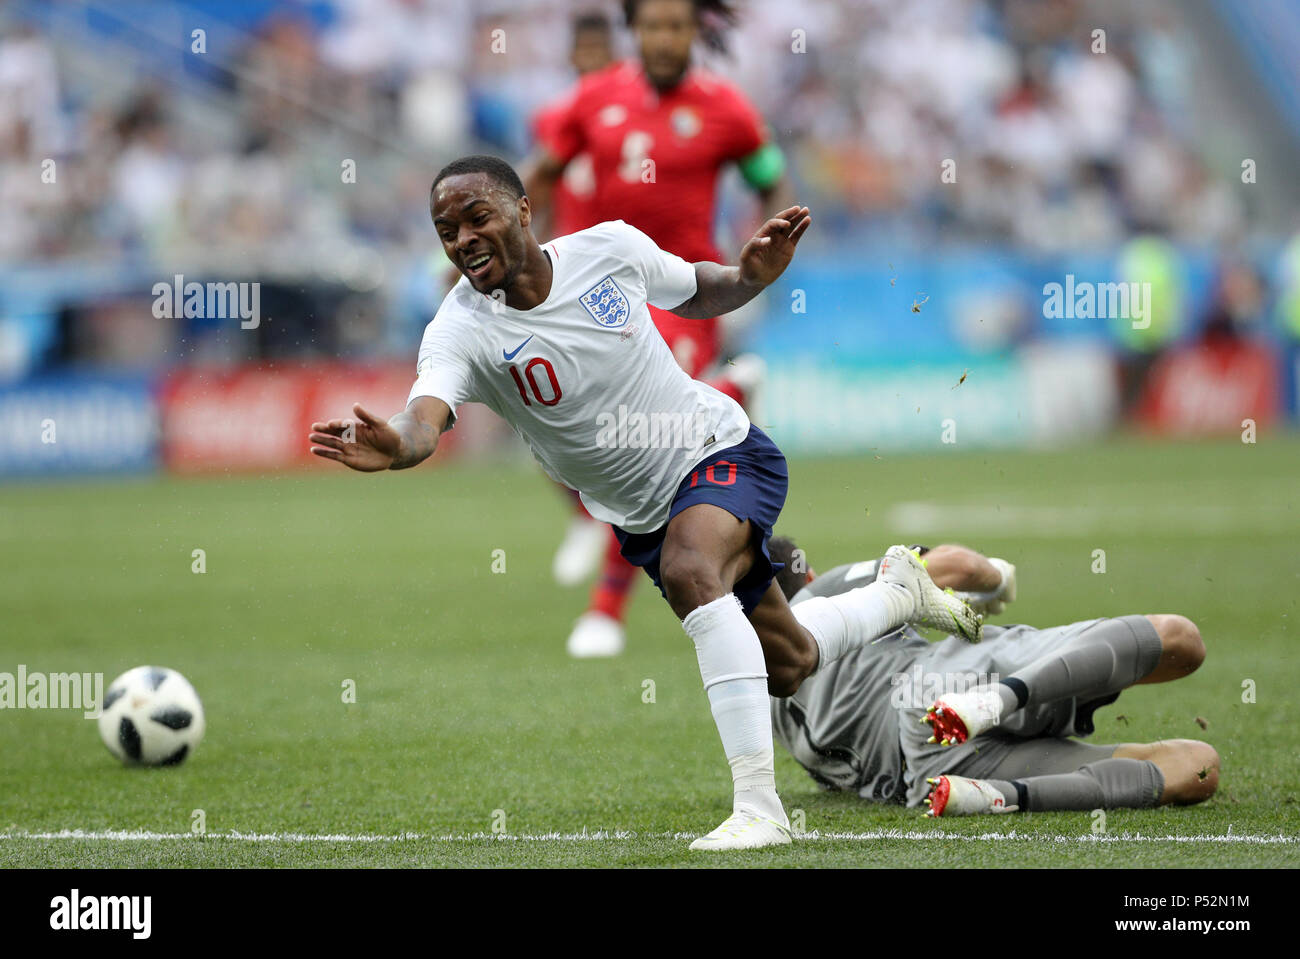 England's Raheem Sterling (top) and Panama's Jaime Penedo battle for the ball during the FIFA World Cup Group G match at the Nizhny Novgorod Stadium. Stock Photo